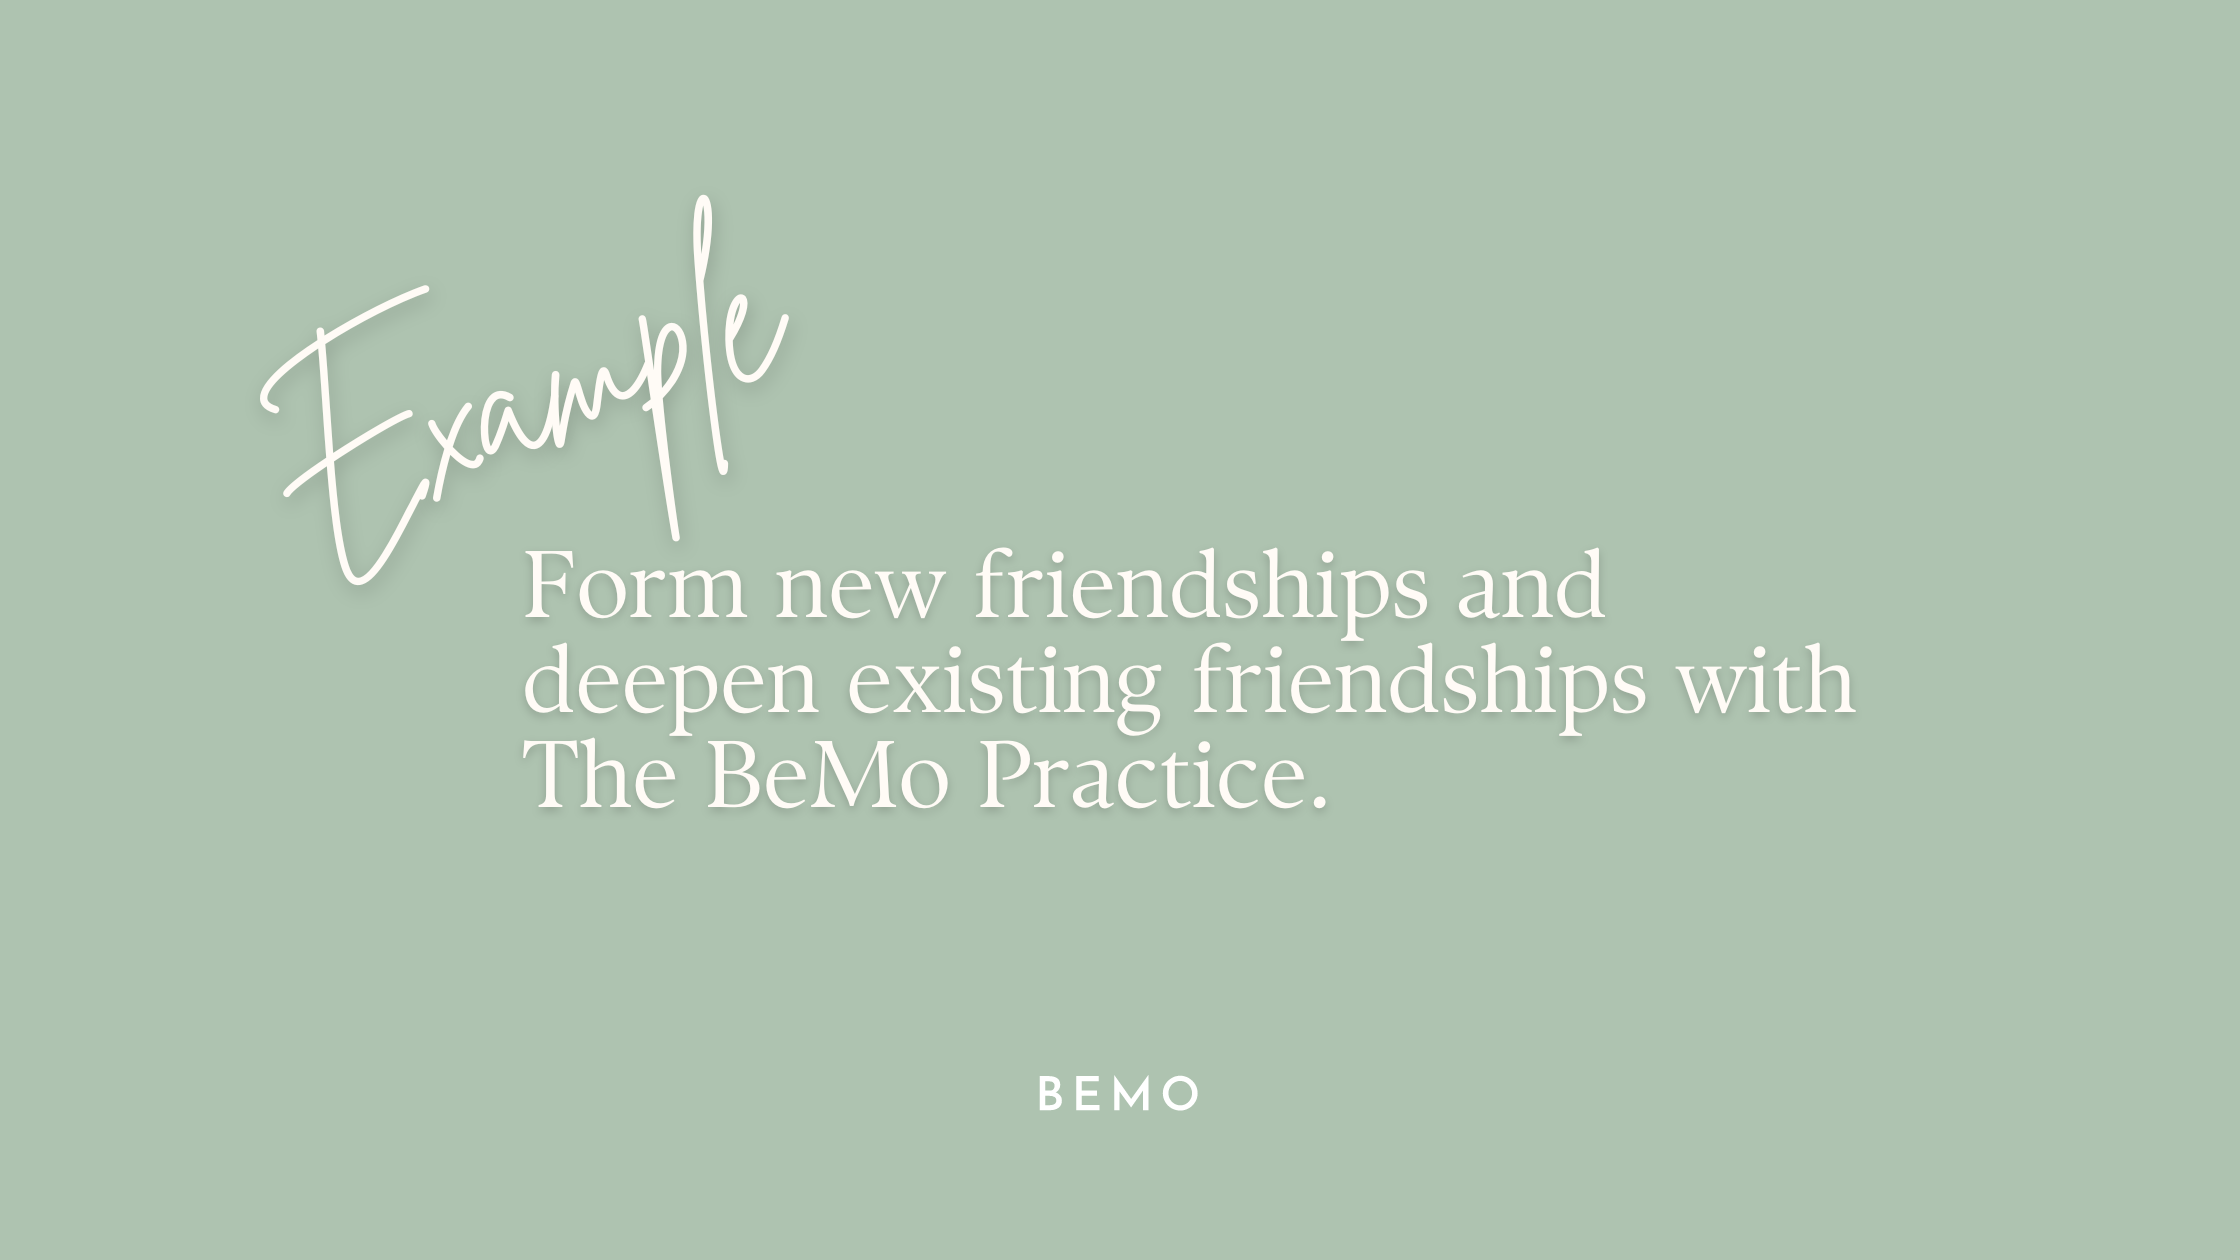 Using The BeMo Practice To Form & Deepen Friendships